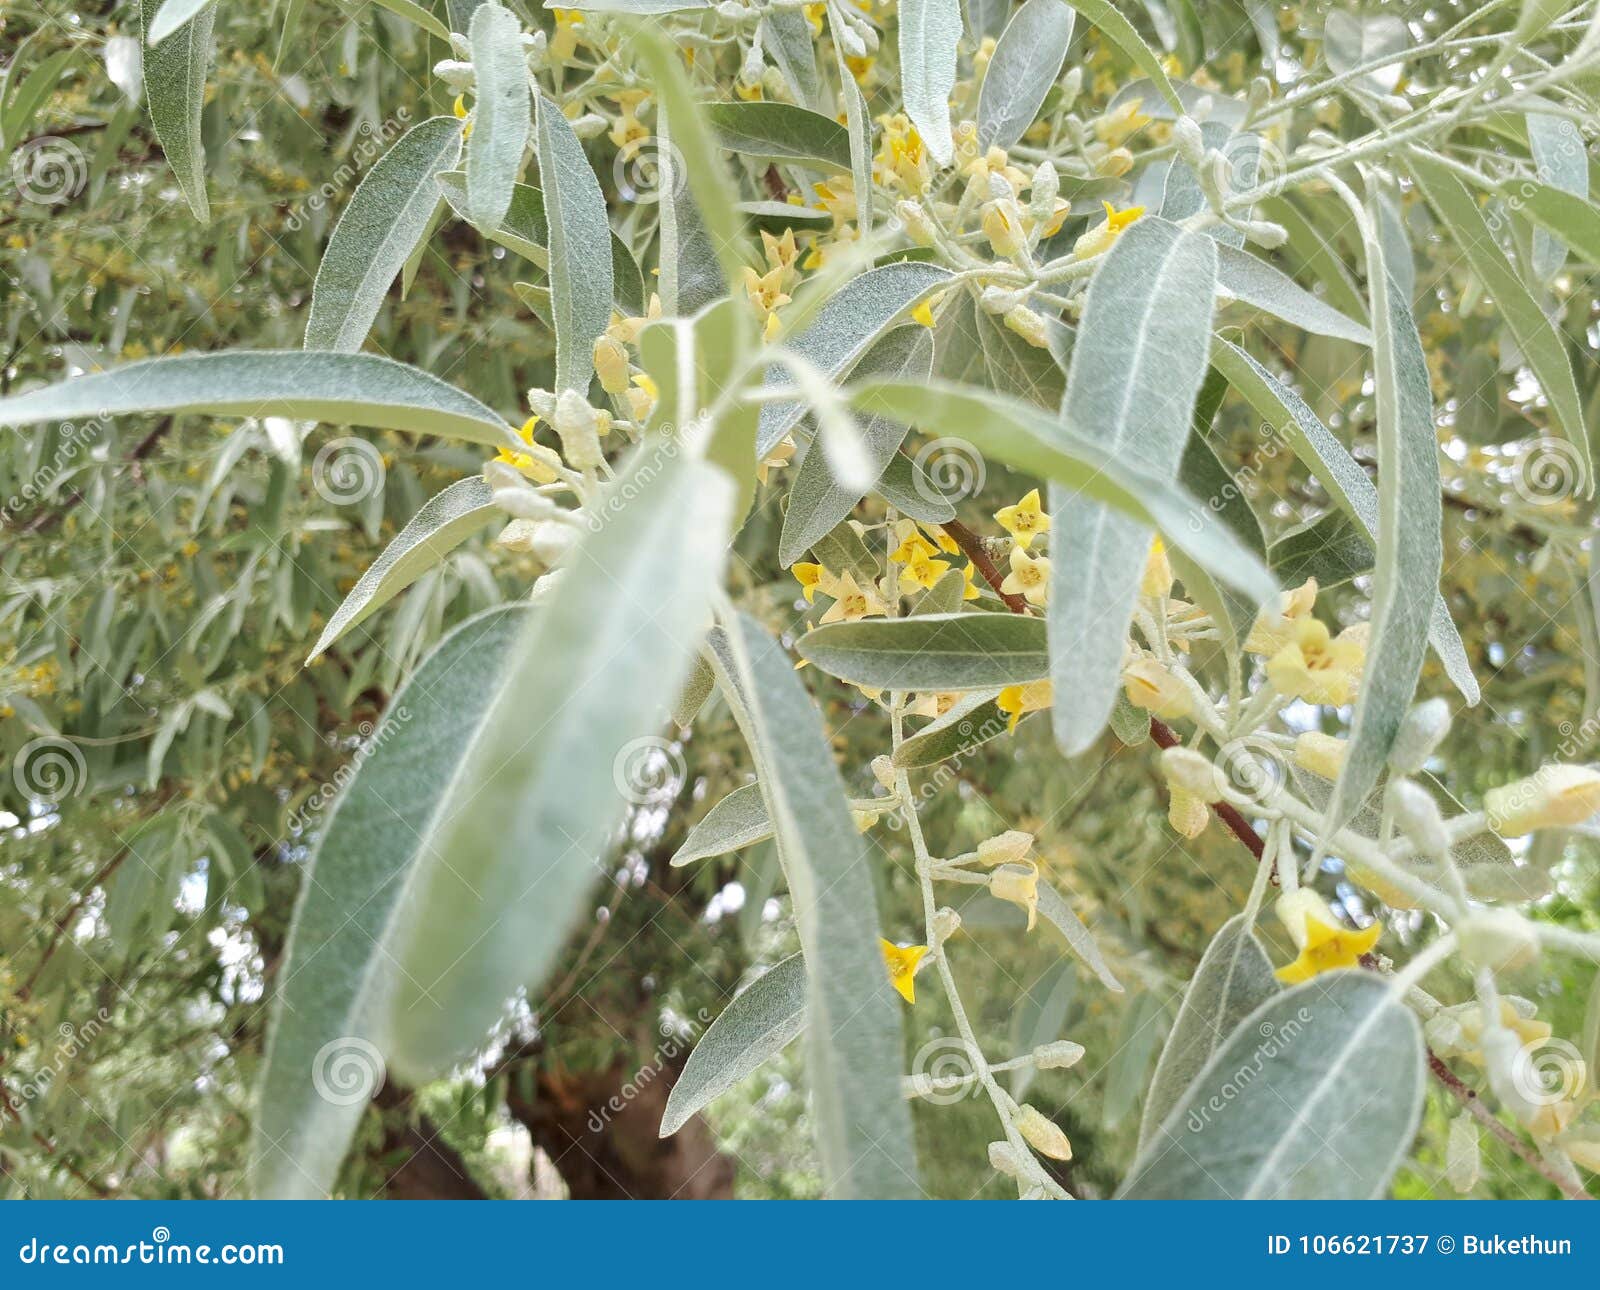 Olive Flowers On Tree Branches Stock Image Image Of Tree Botany